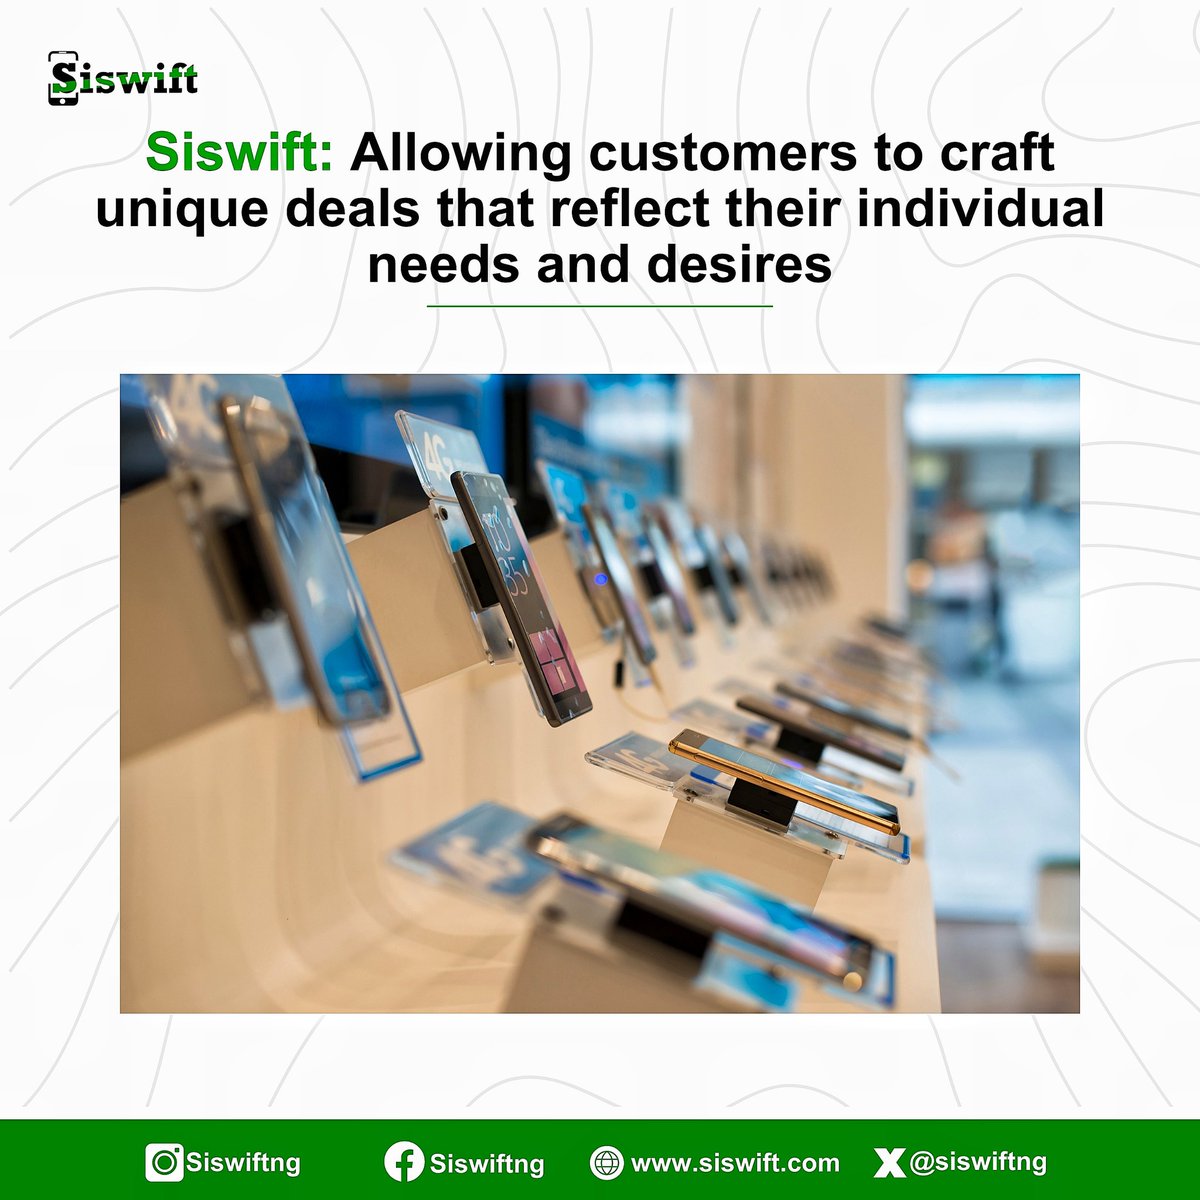 Break free from traditional boundaries with Siswift! 

Craft unique deals that cater to your individual needs and desires.
.
.
.
#uniquedeals #personalizedexperience #breakingboundaries #transparenttransactions #negotiationpower #convenience #digitalmarketing #siswift #phones